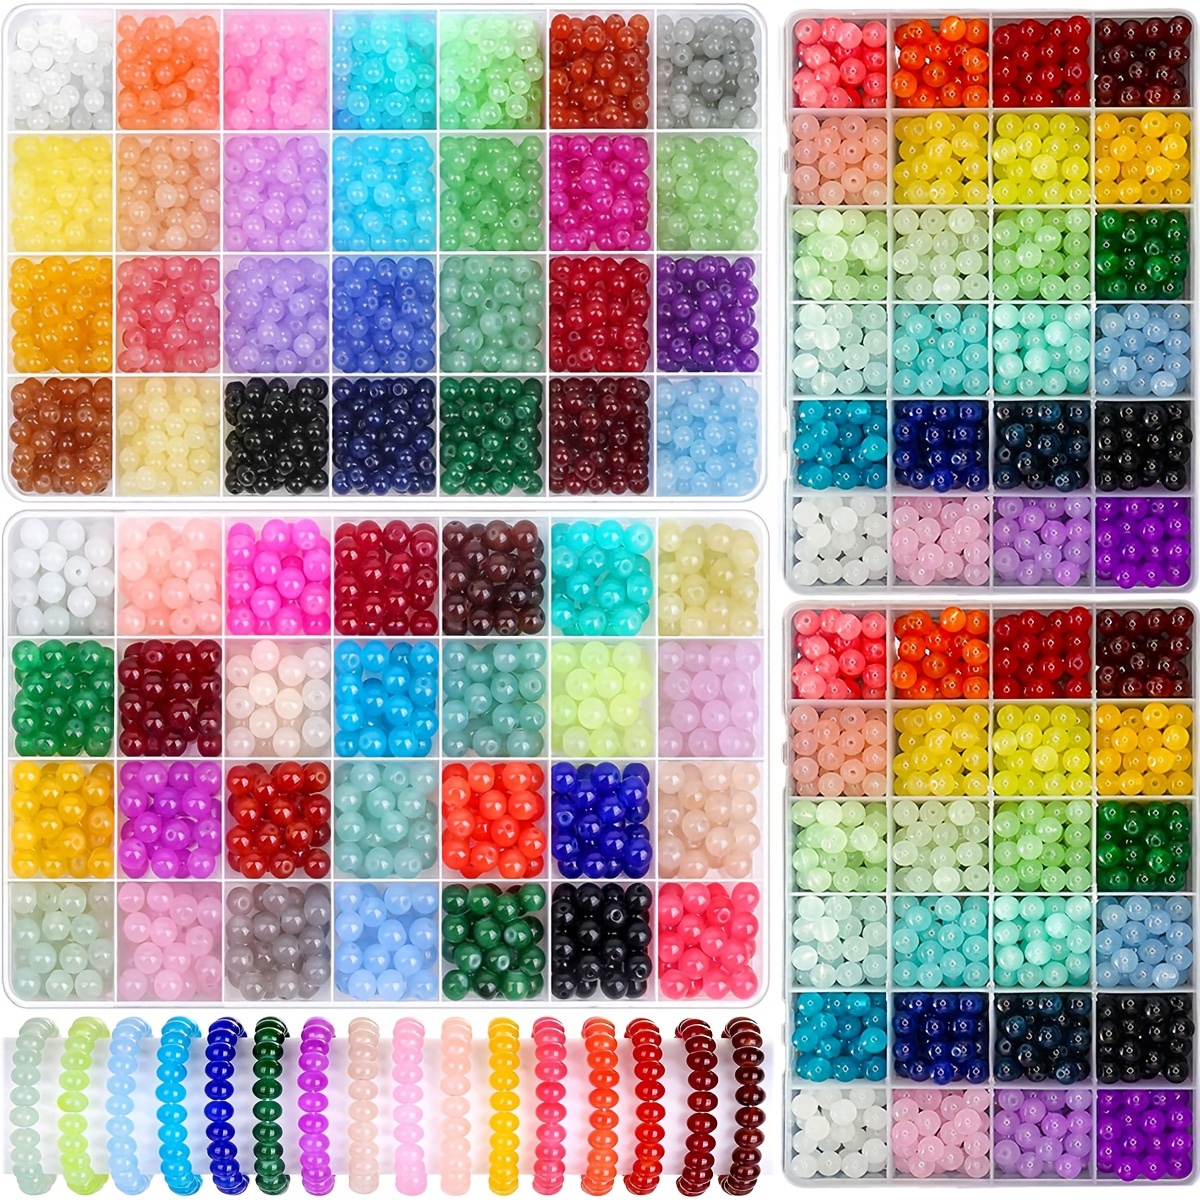 

700/1200pcs 28/48 Grids 24/28 Colors 6/8mm Crystal Class Beads For Jewelry Making Diy Fashion Bracelet Necklace Beginners Handmade Craft Supplies